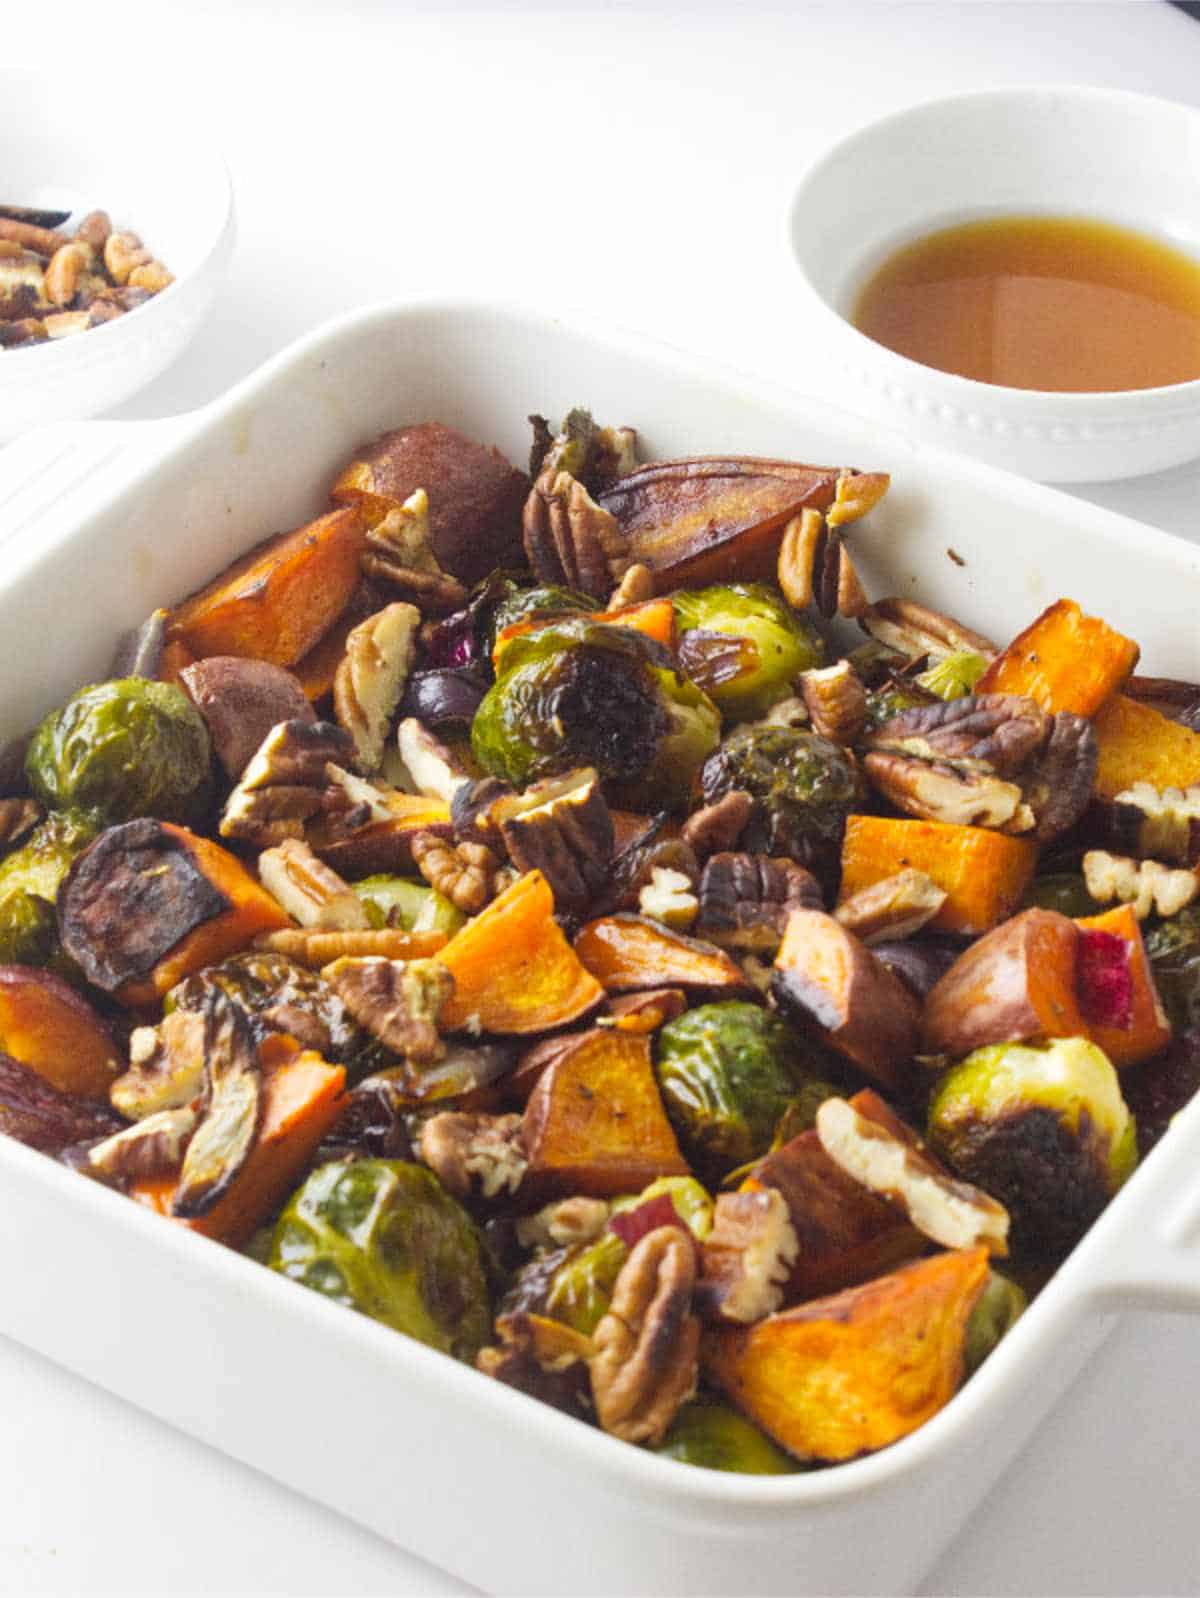 roasted brussels sprouts and sweet potatoes in a serving dish.